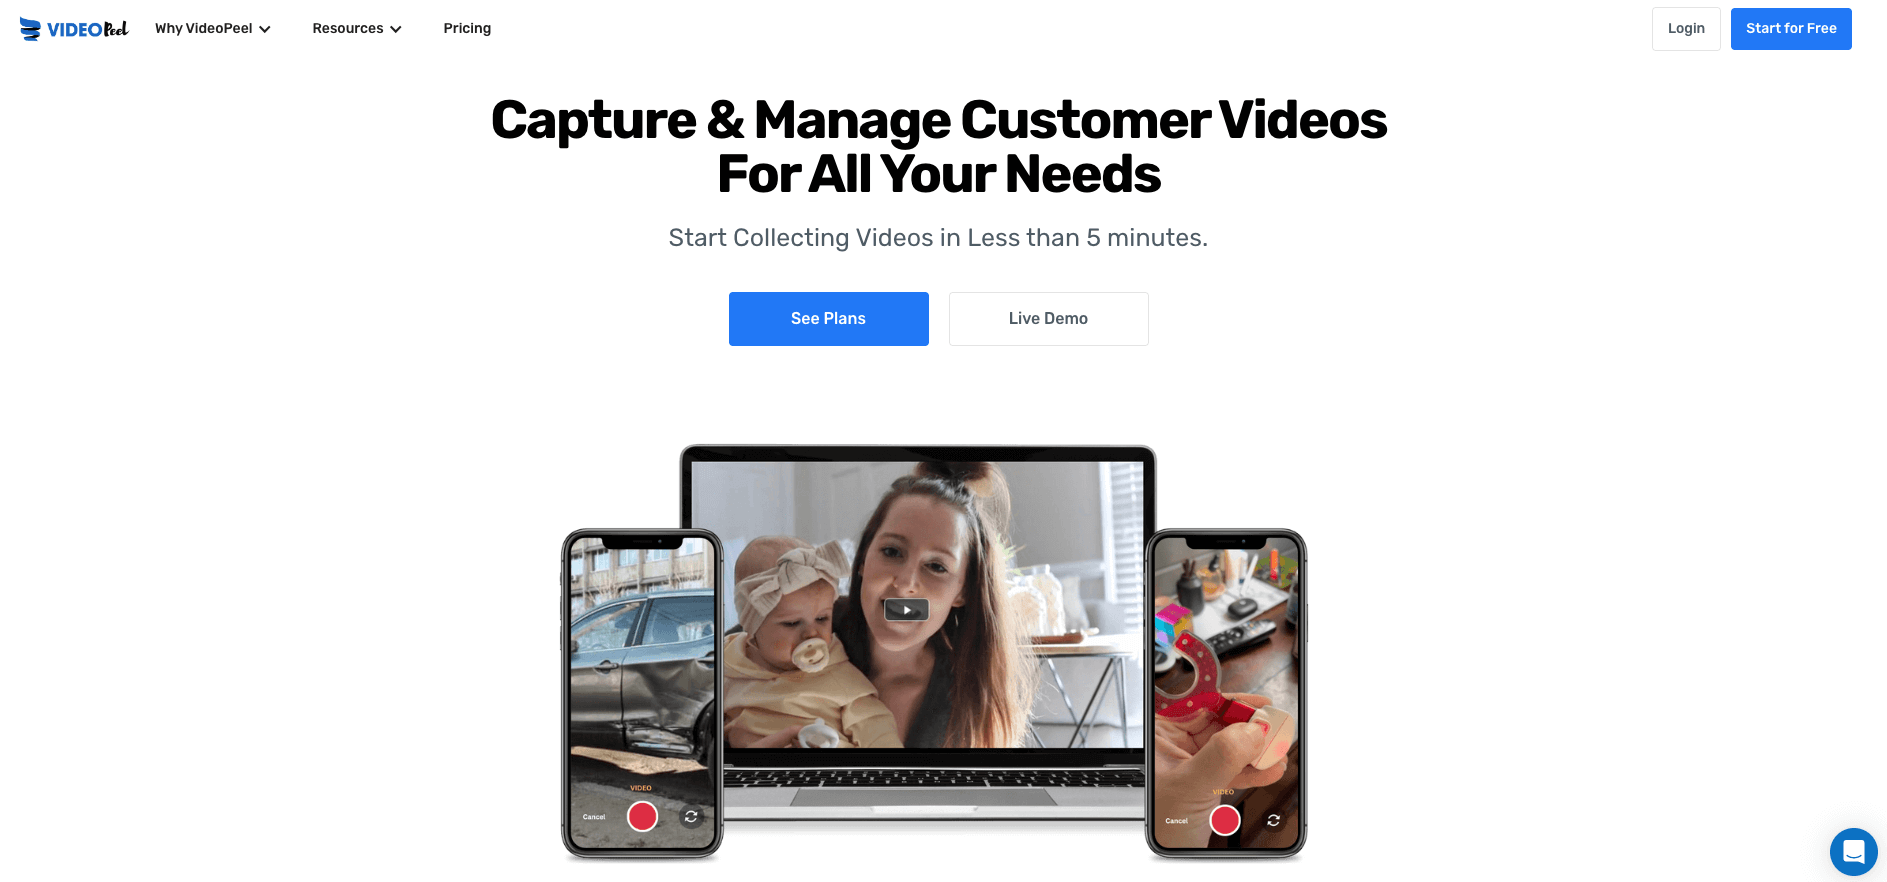 VideoPeel homepage: Capture & Manage Customer Videos For All Your Needs